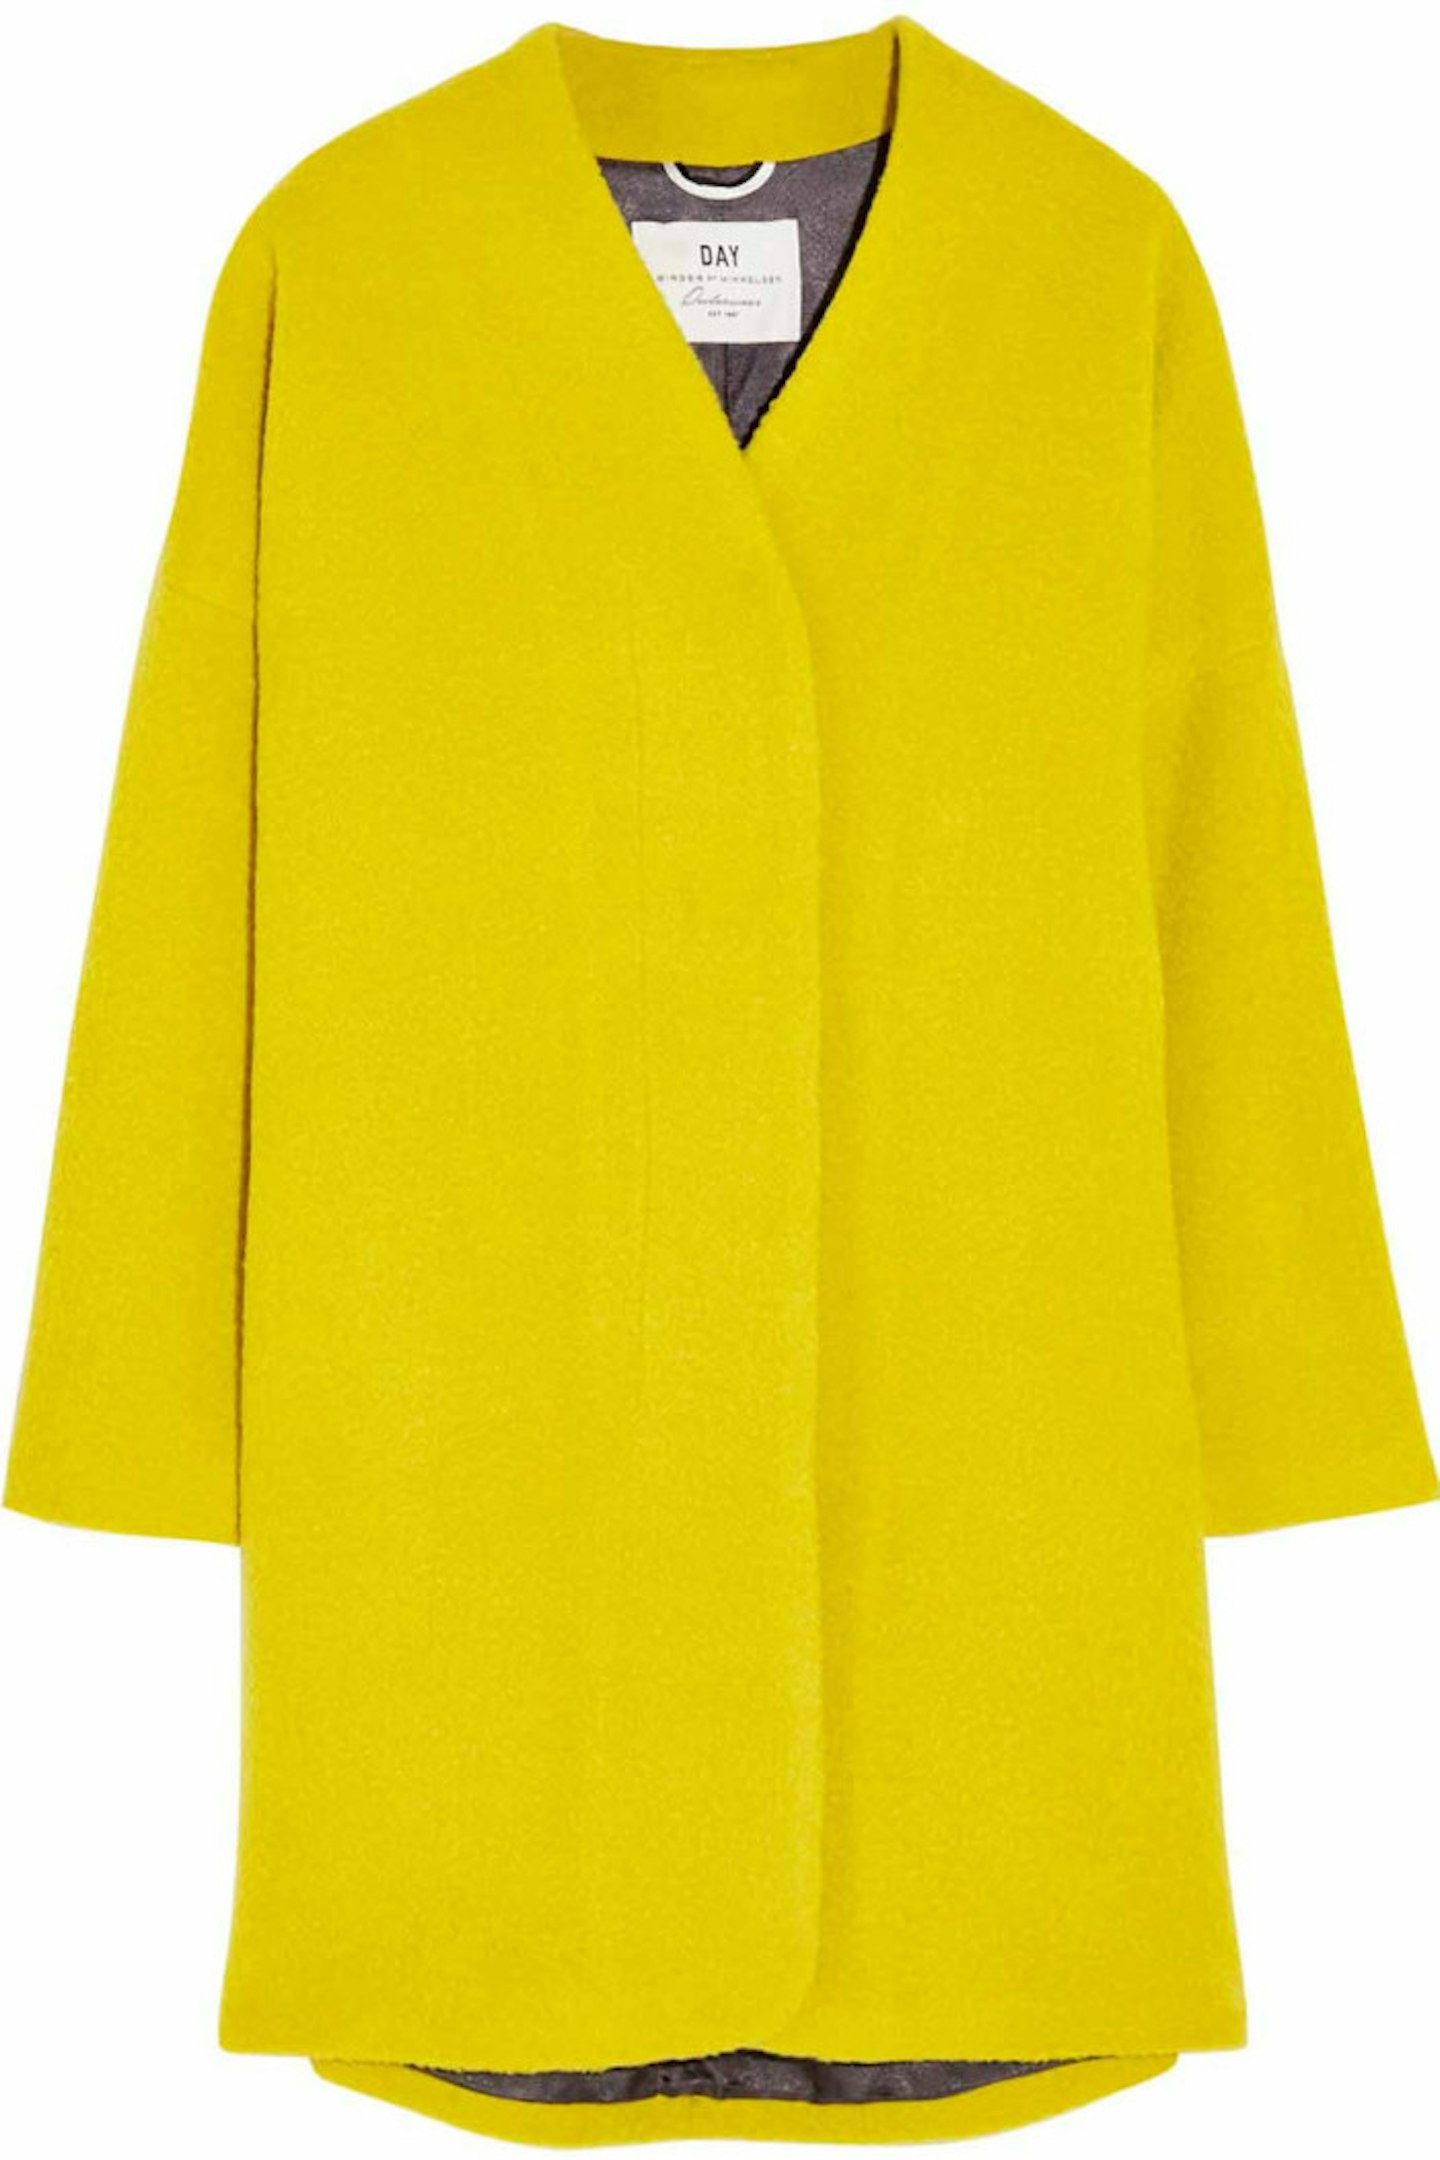 GALLERY >> Scroll through for bestest and brightest coats available today >>